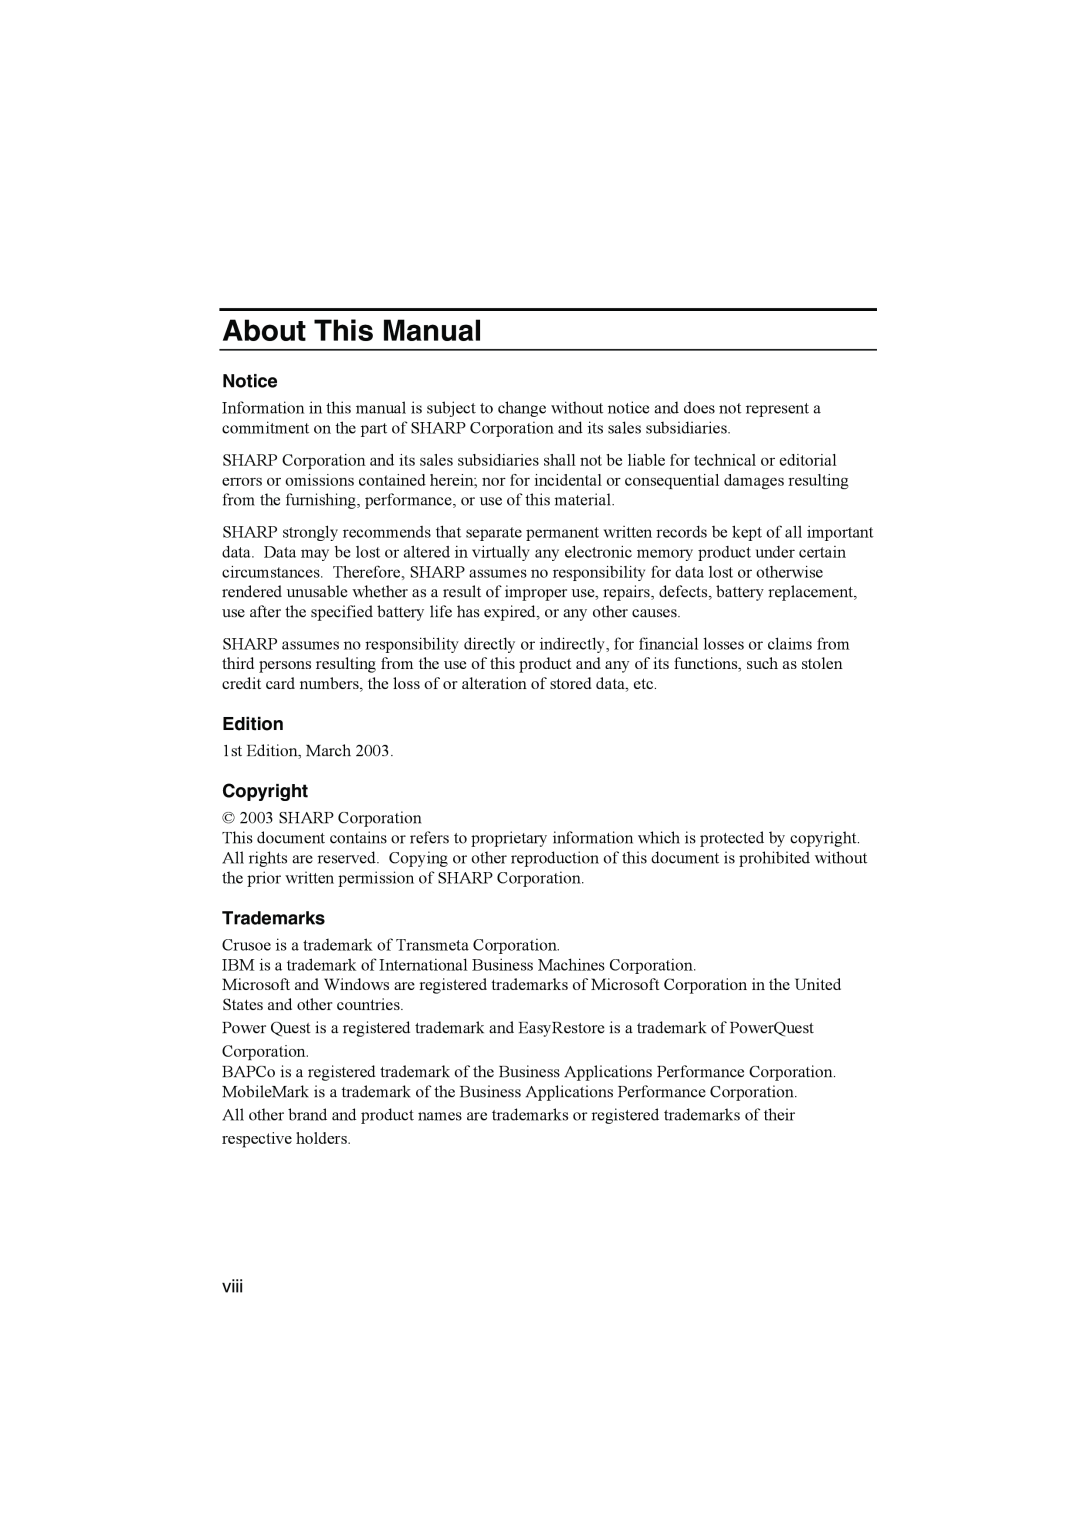 Sharp PC-MM1 manual About This Manual, Edition, Copyright, Trademarks 